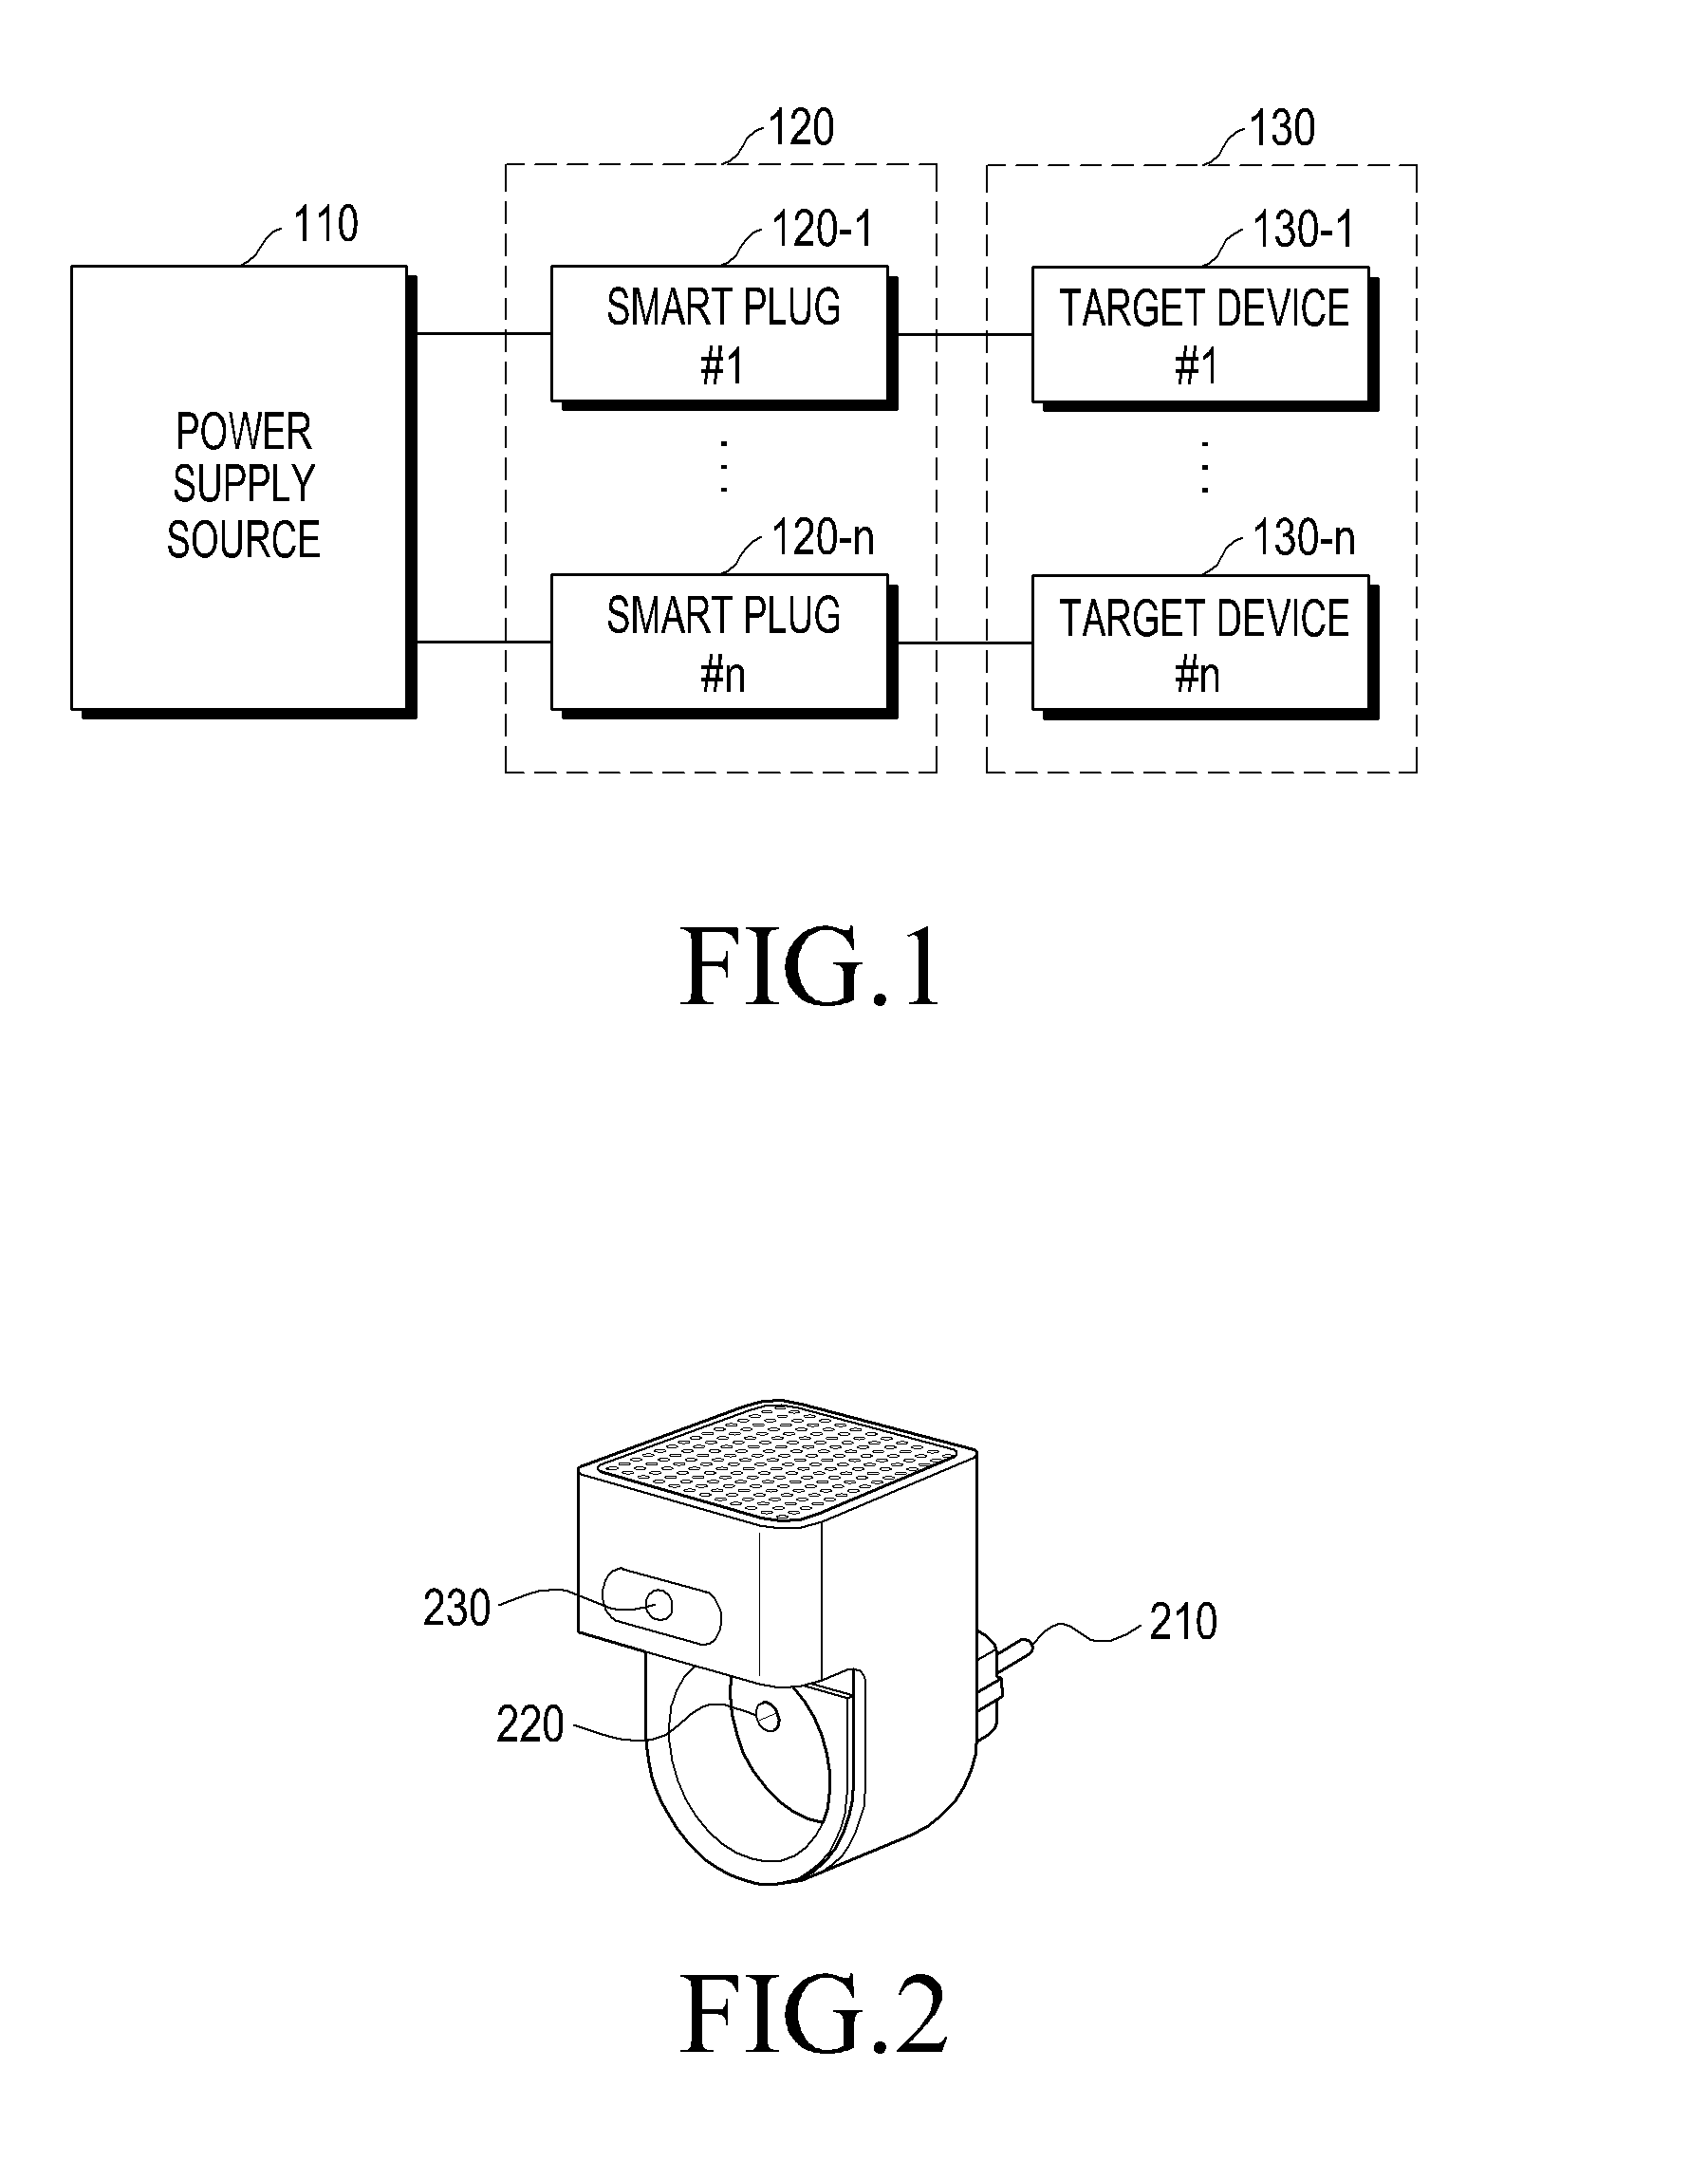 Apparatus and method for sensing event in smart plug device